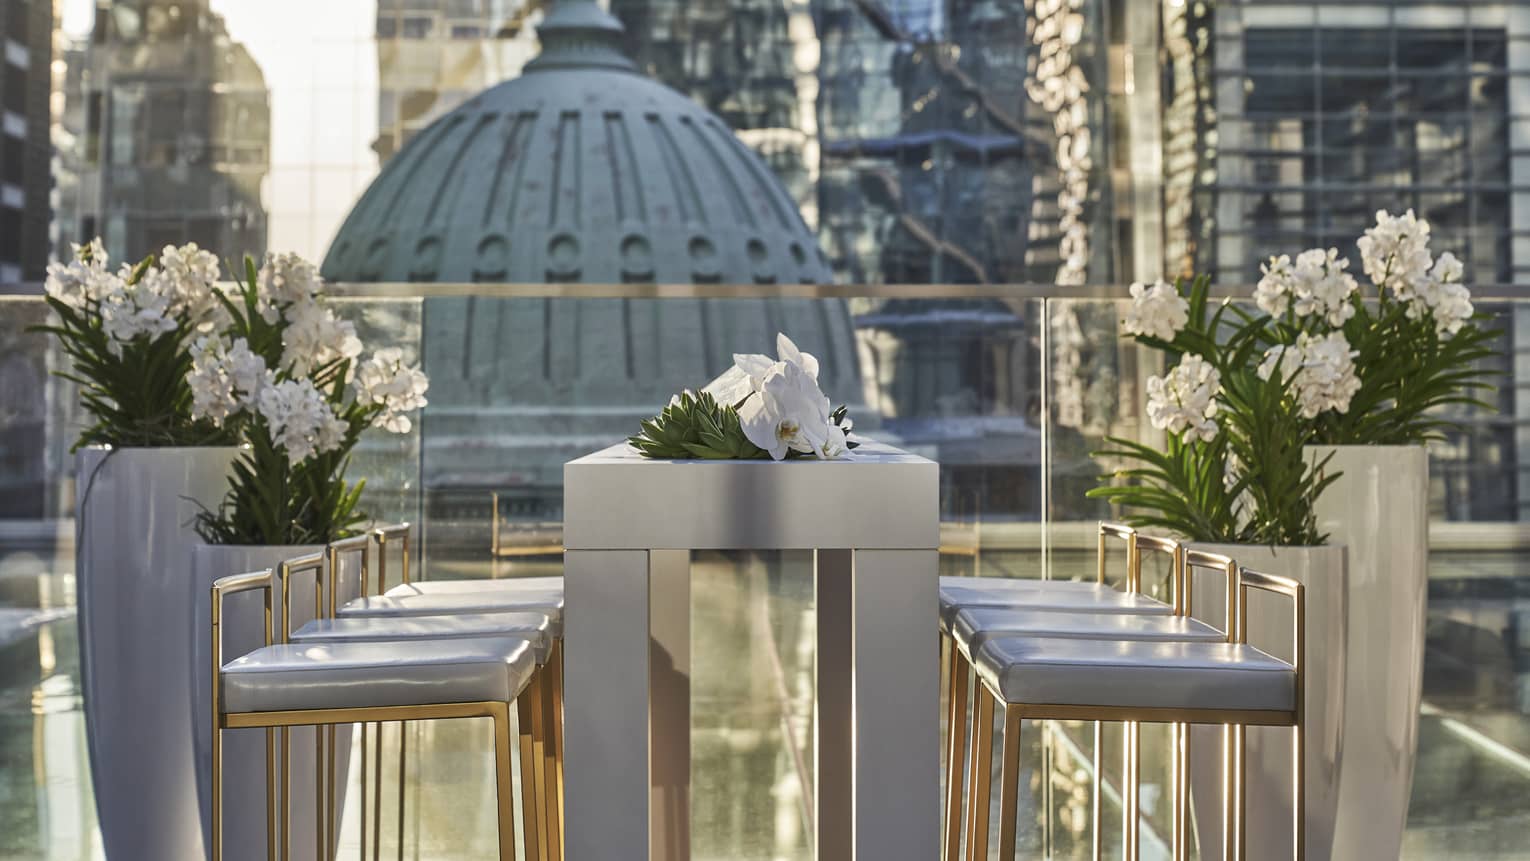 The outdoor Ballroom terrace is decorated with a silver table lined with white flowers and overlooks Philadelphia